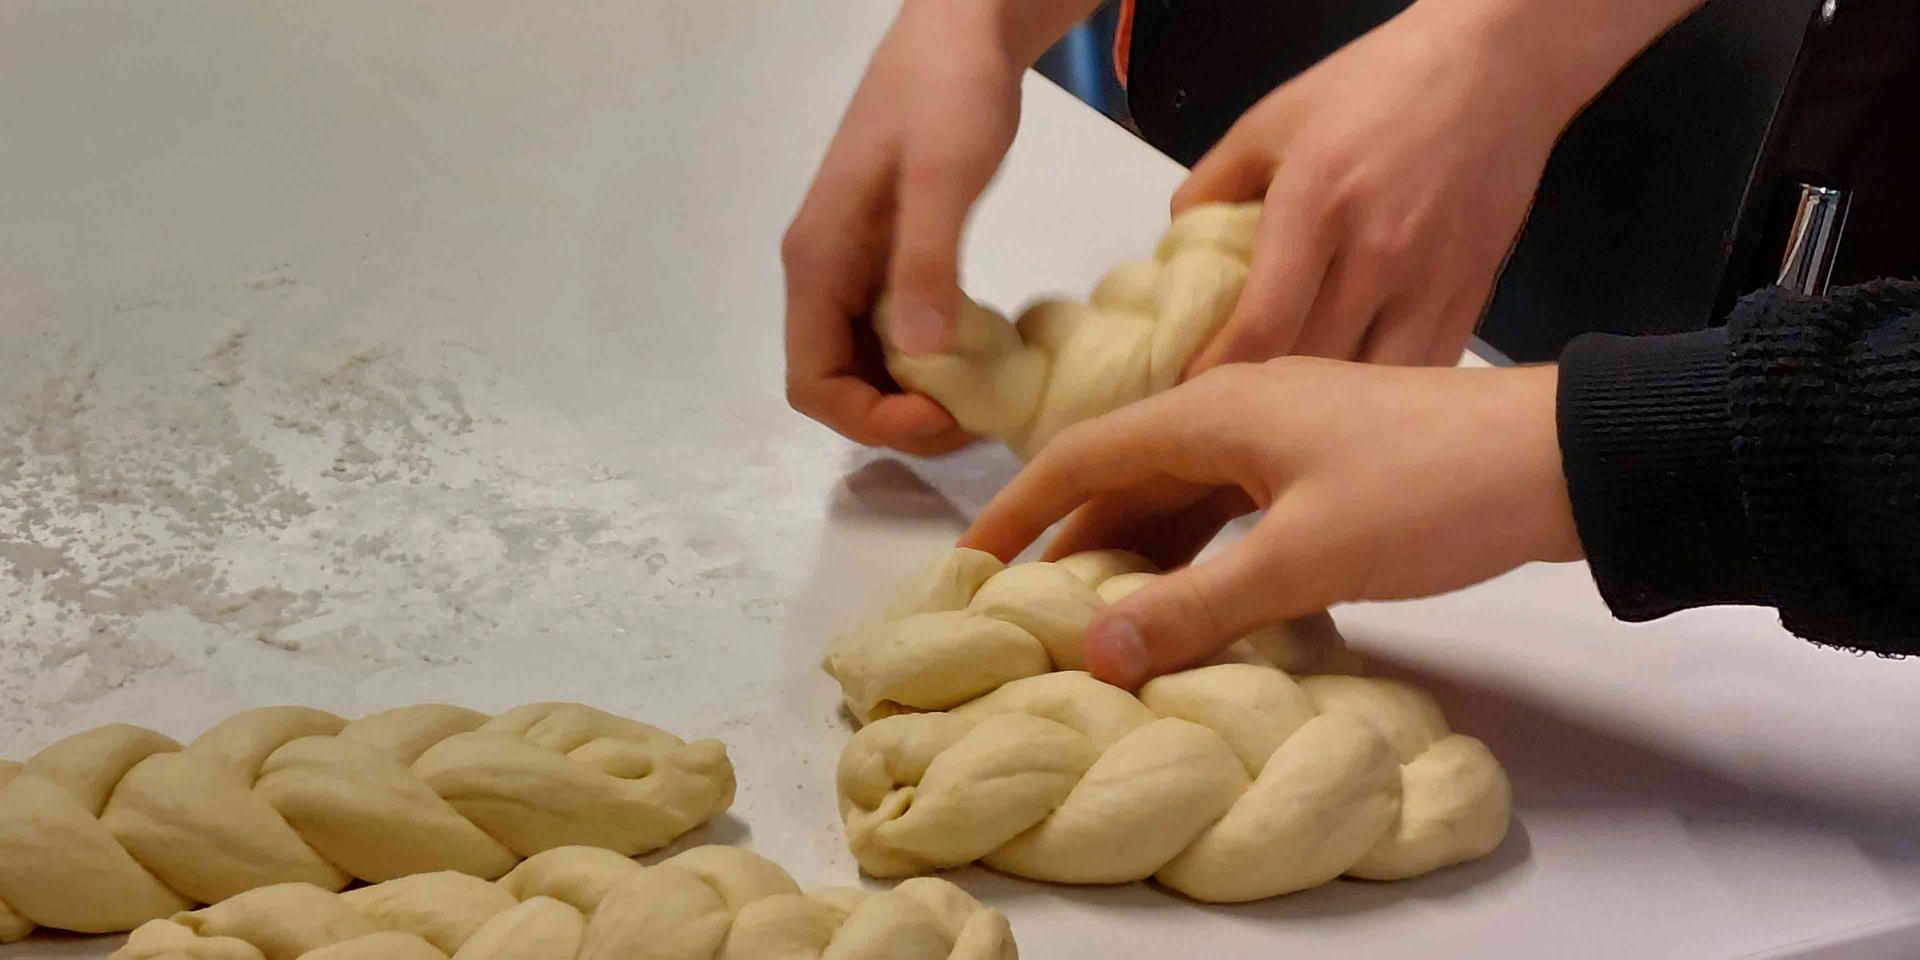 Hands make plaits of dough on a table.